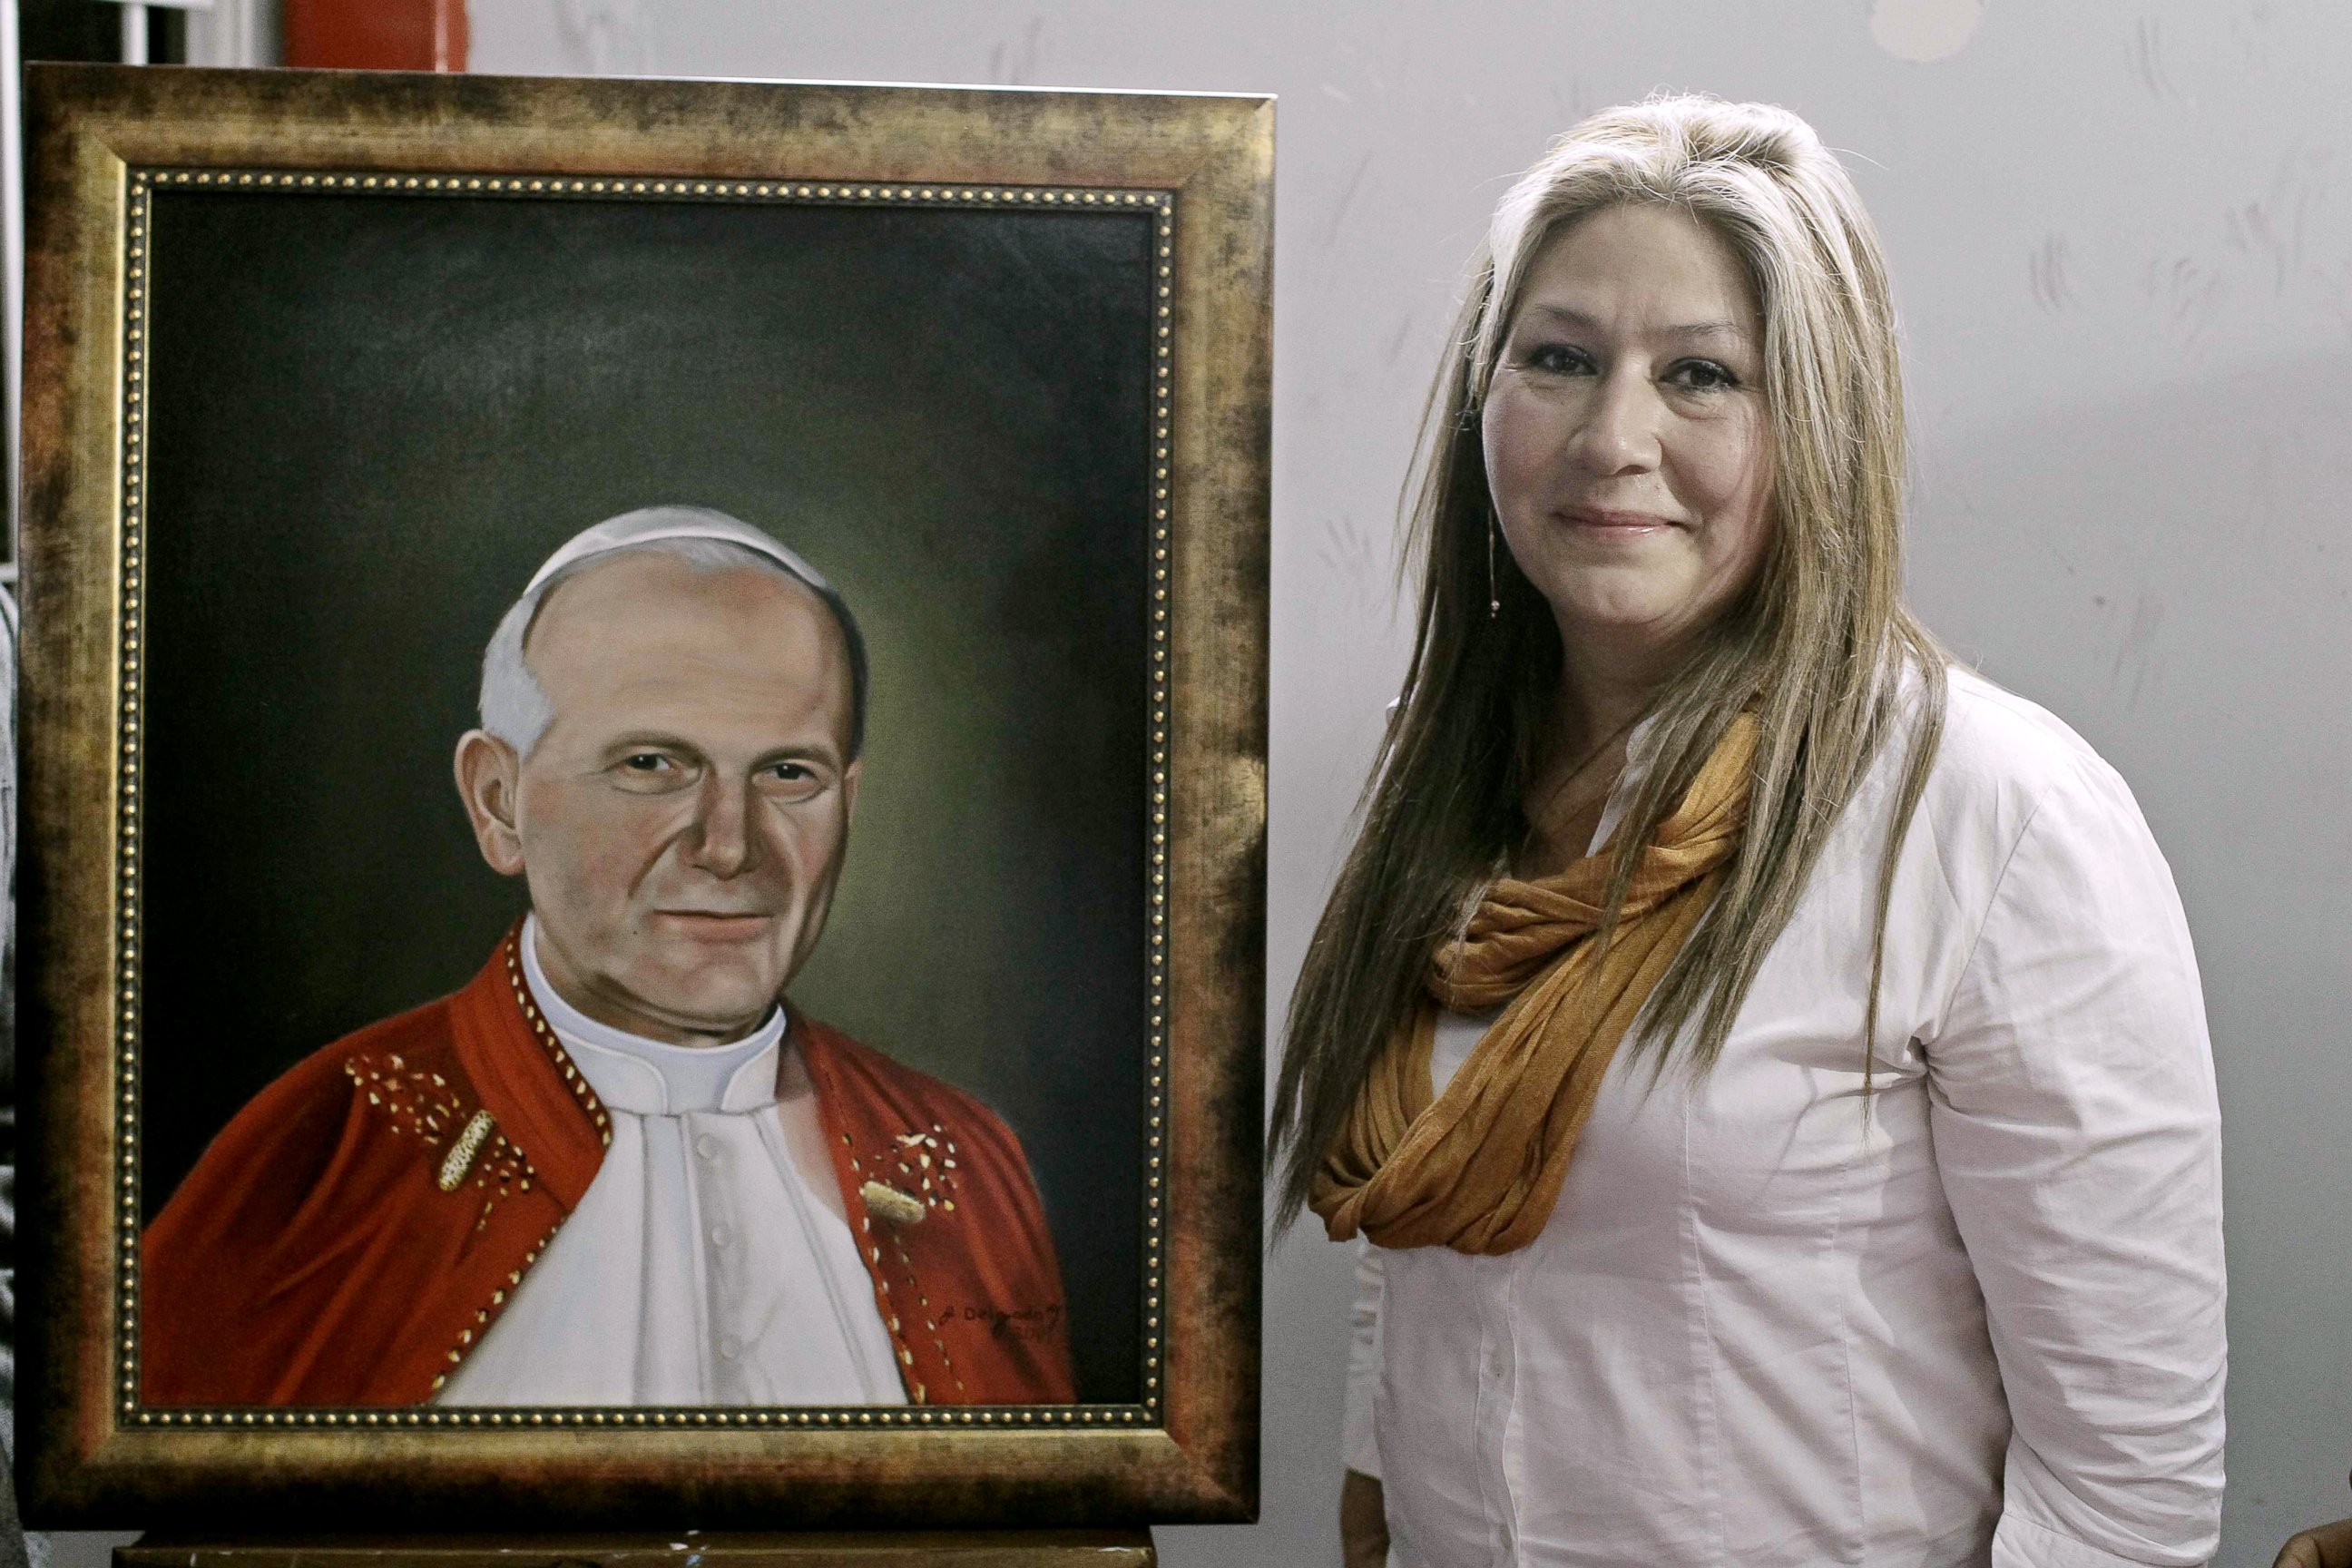 PHOTO: Costa Rican citizen Floribeth Mora, who was healed from a brain aneurysm through a miracle that is attributed to Pope John Paul II, poses next to a portrait of him during a press conference in San Jose, Costa Rica, April 22, 2014.